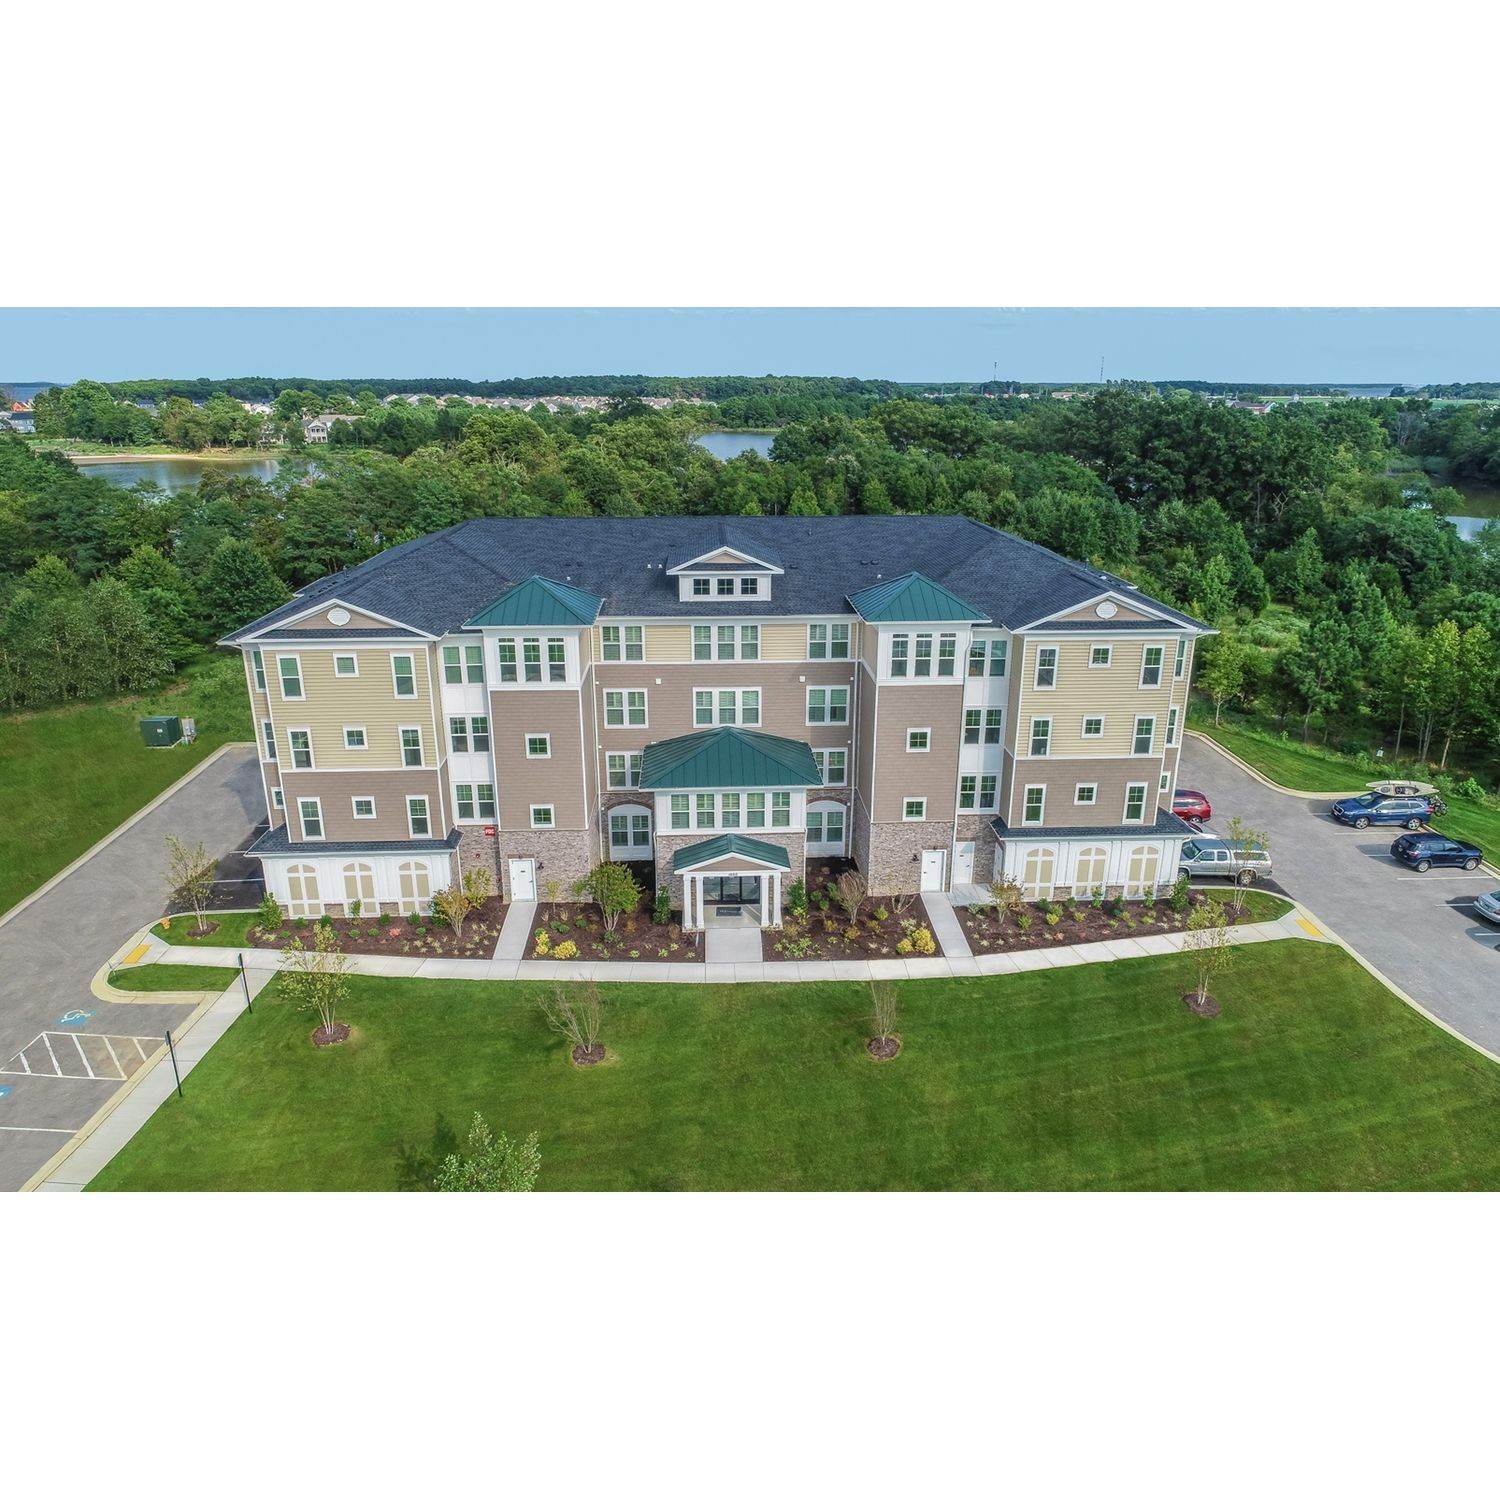 2. K. Hovnanian’s® Four Seasons at Kent Island - Luxury Condos xây dựng tại 131 Flycatcher Way, Chester, MD 21619